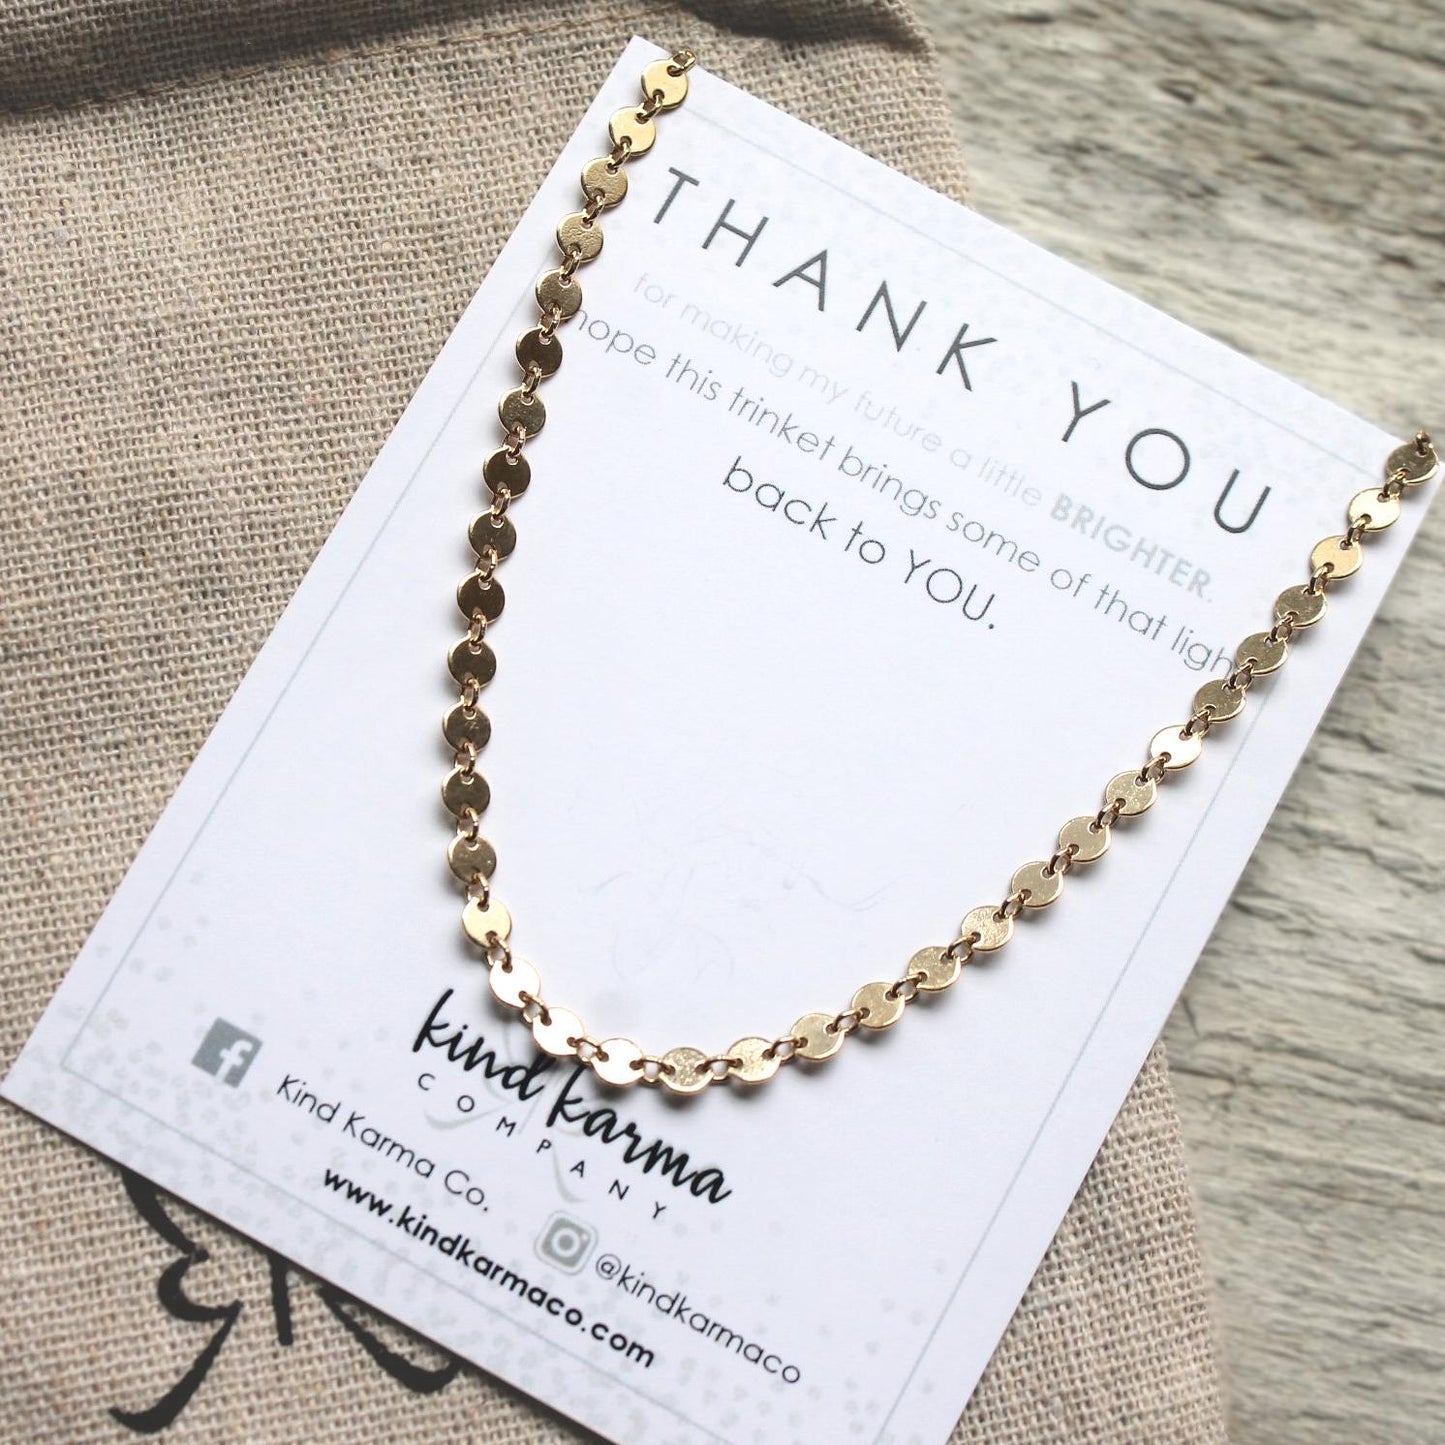 Coin Choker - 14KT Gold ~ Made in Toronto